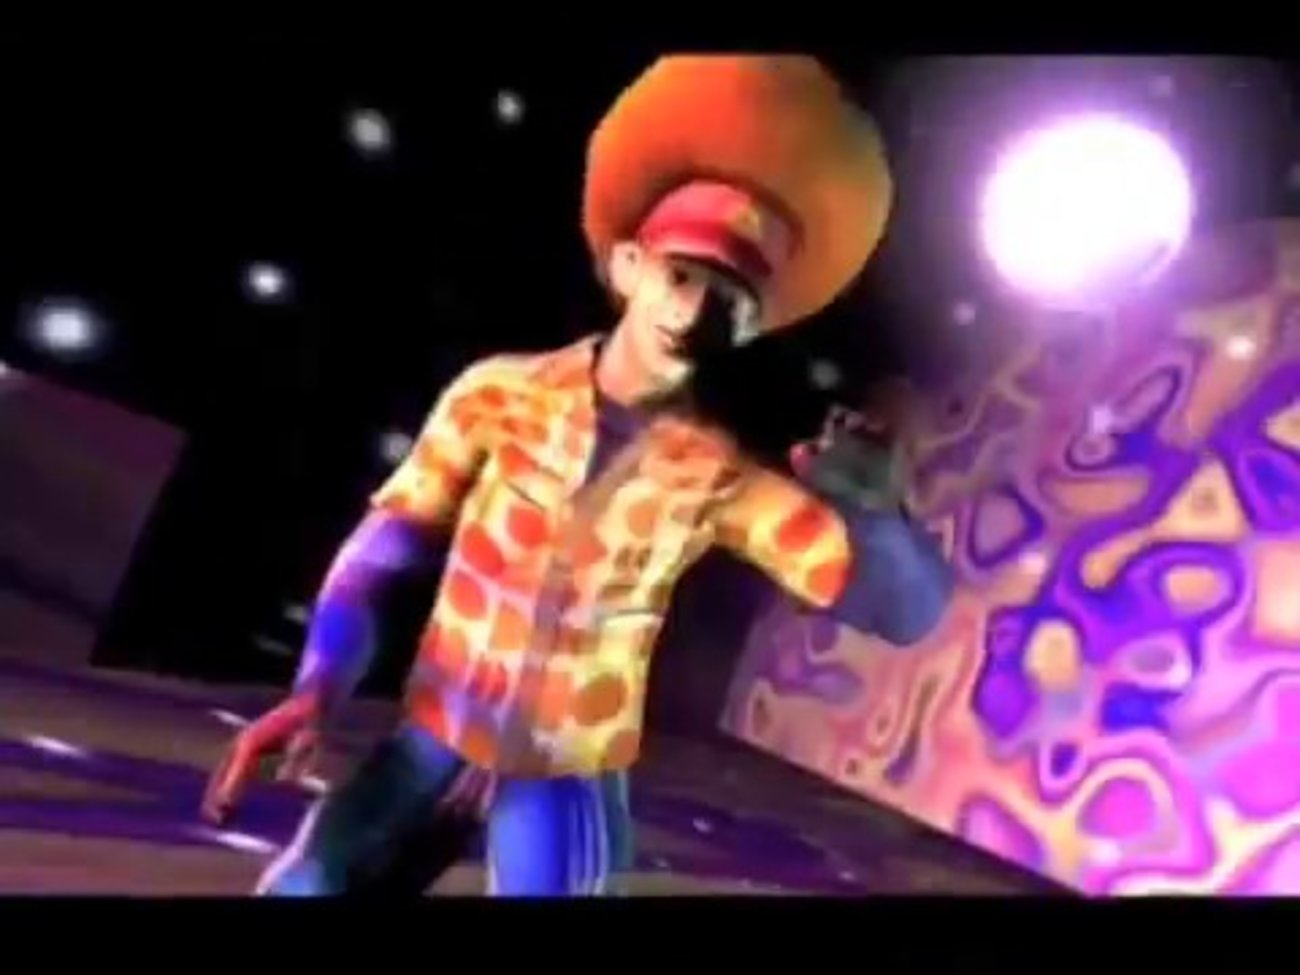 ssx-tricky-title-intro-ft.-run-dmc-it-s-tricky-49748.mp4